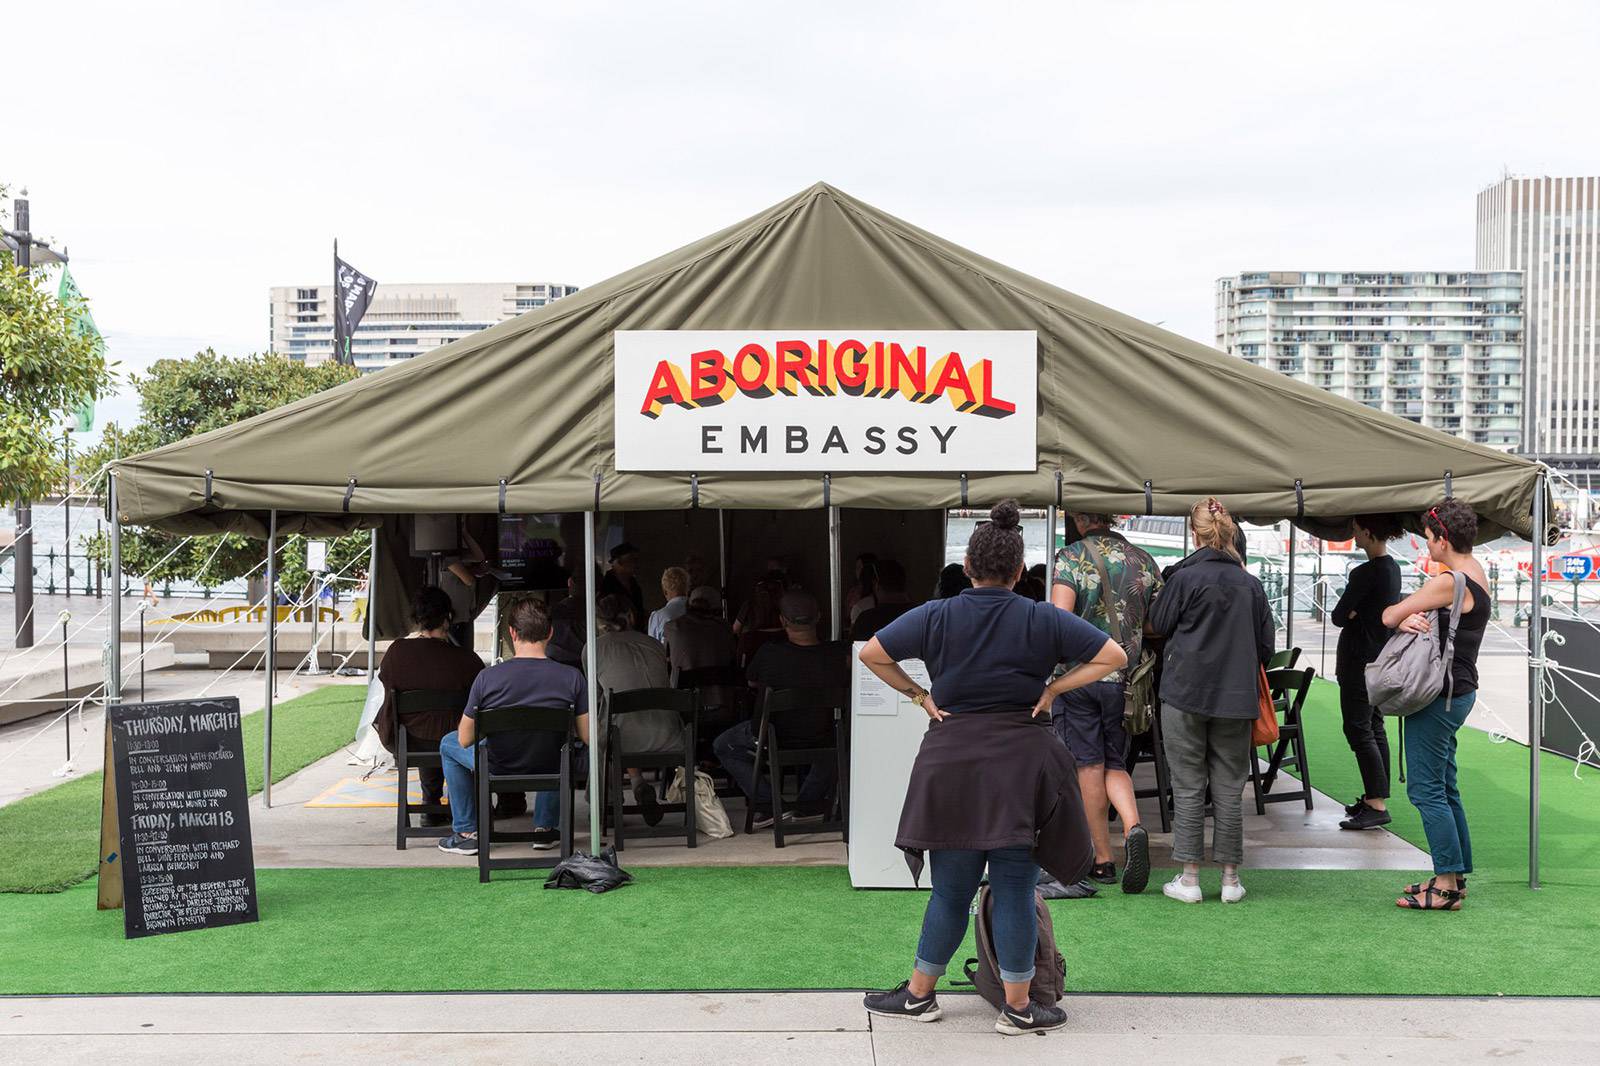 Richard Bell, Embassy 2013, canvas tent with annex, alumninium frame, rope, synthetic polymer paint on ply; 16mm film transferred to single-channel digital video, black and white, sound; archive. Museum of Contemporary Art Australia and Tate, with support from the Qantas Foundation in 2015, purchased 2017